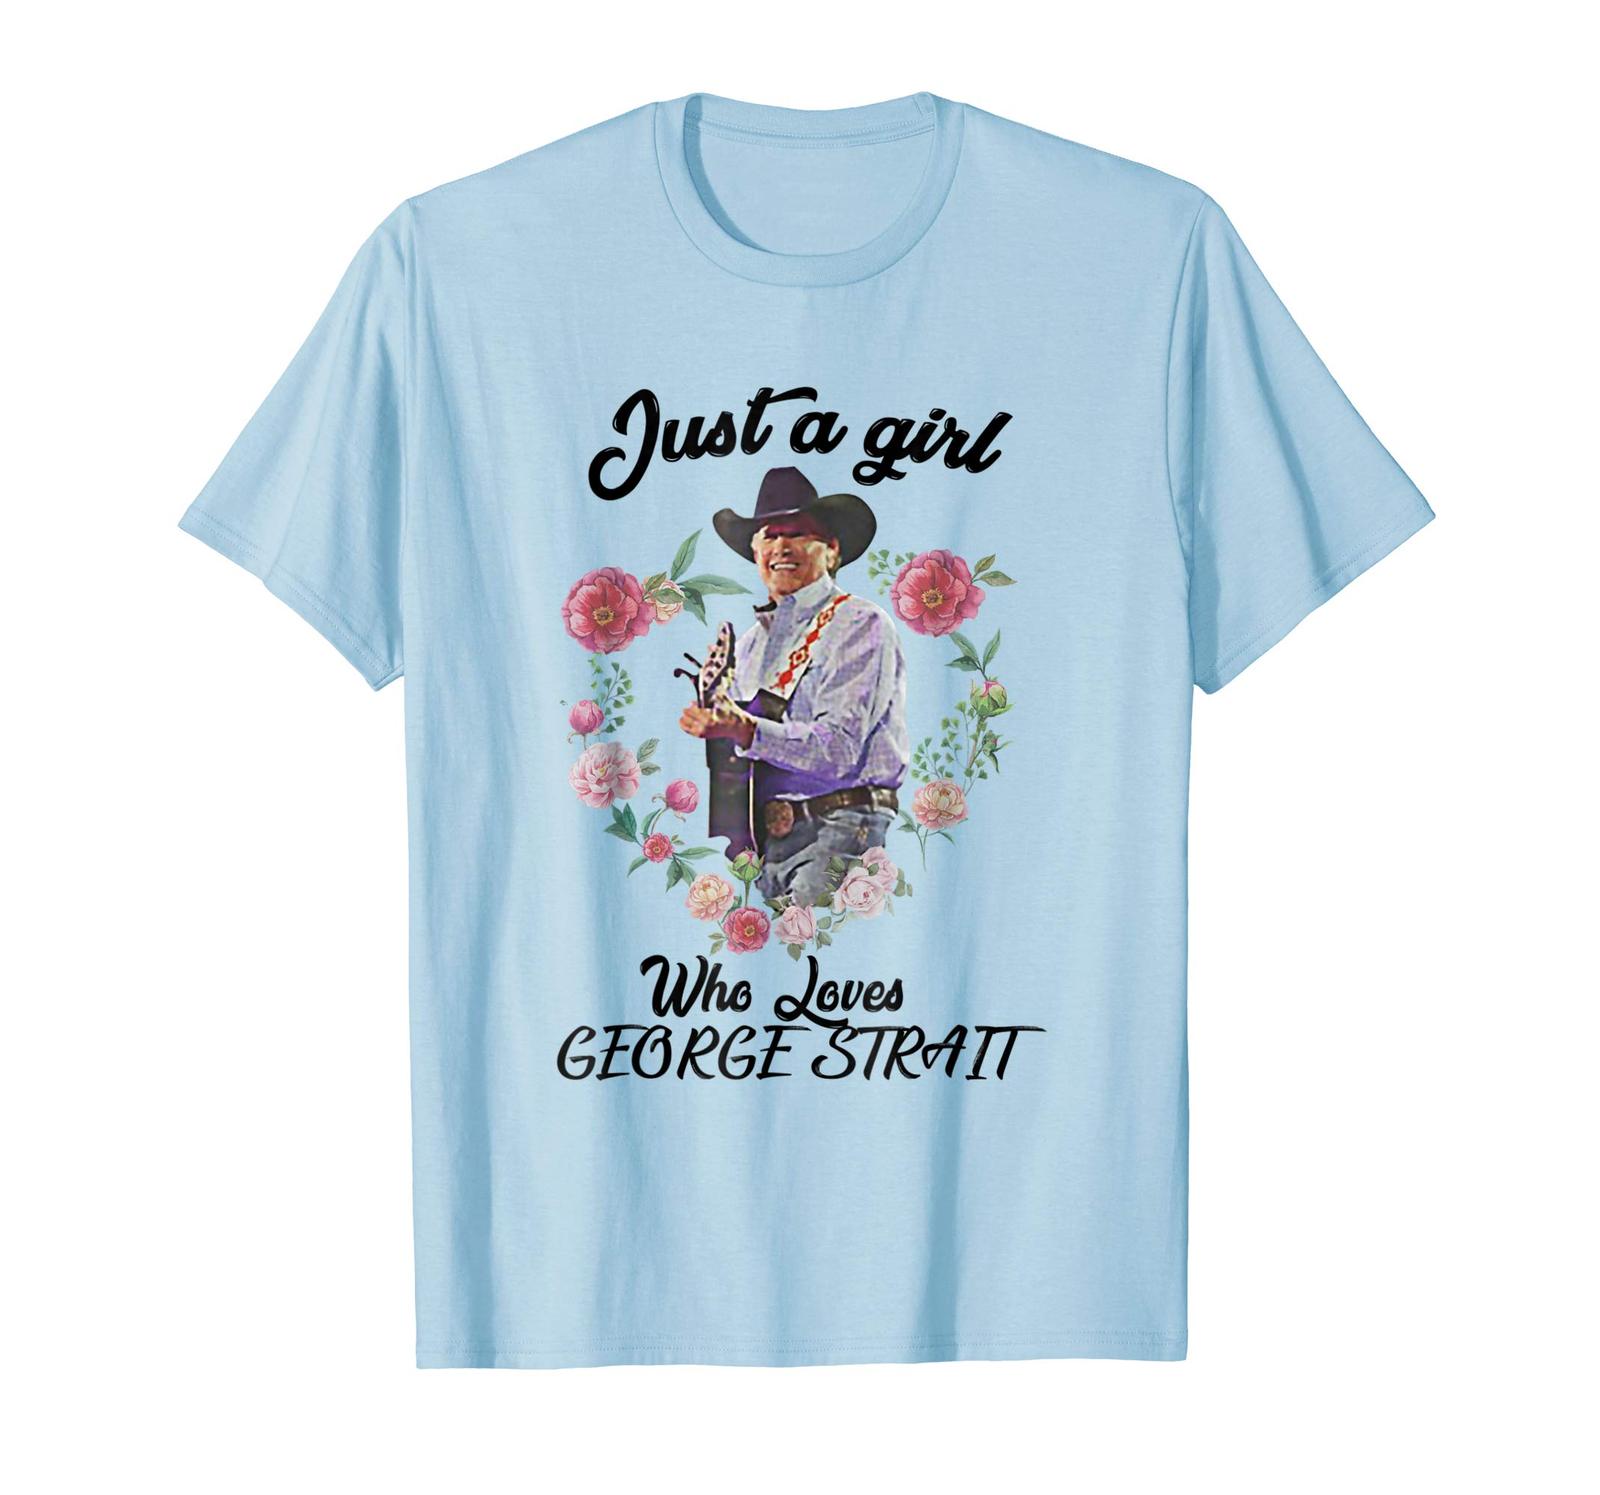 New Tee -  Just a Girl Who Loves Music-Guitar-Singing T-shirt Men - $19.95 - $23.95